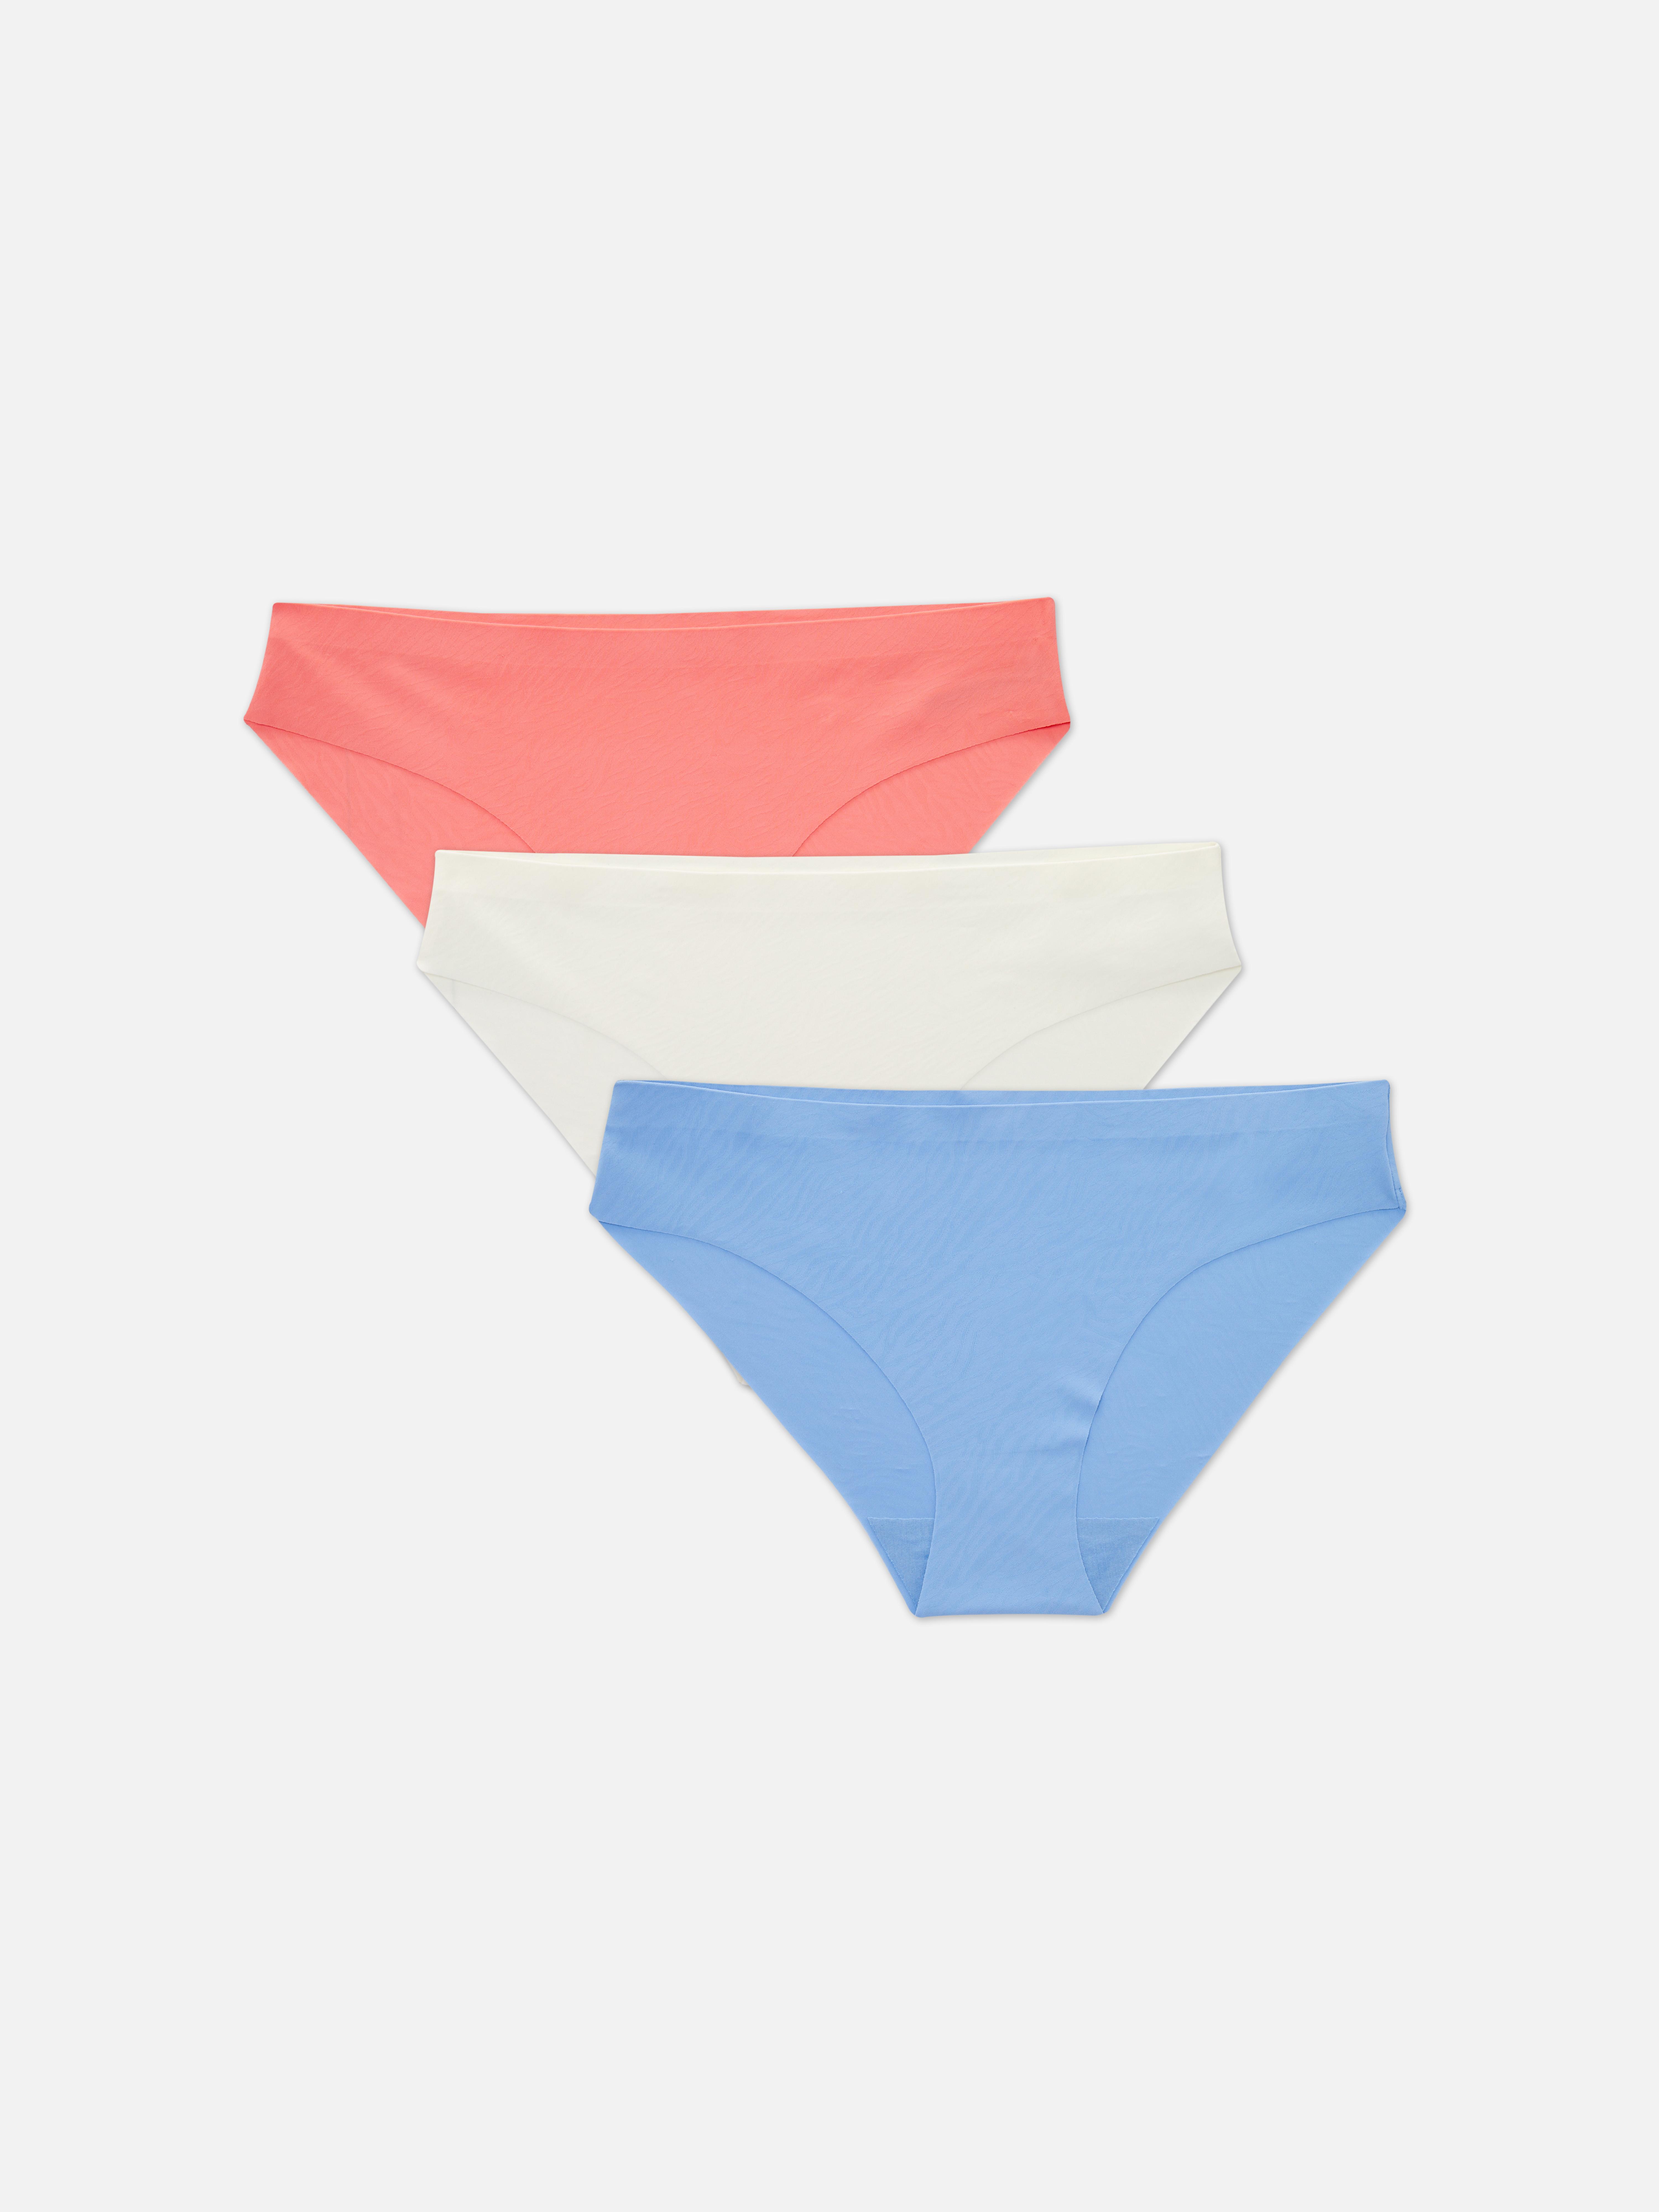 PRIMARK BRIEFS NEW COLLECTION - February 2023 